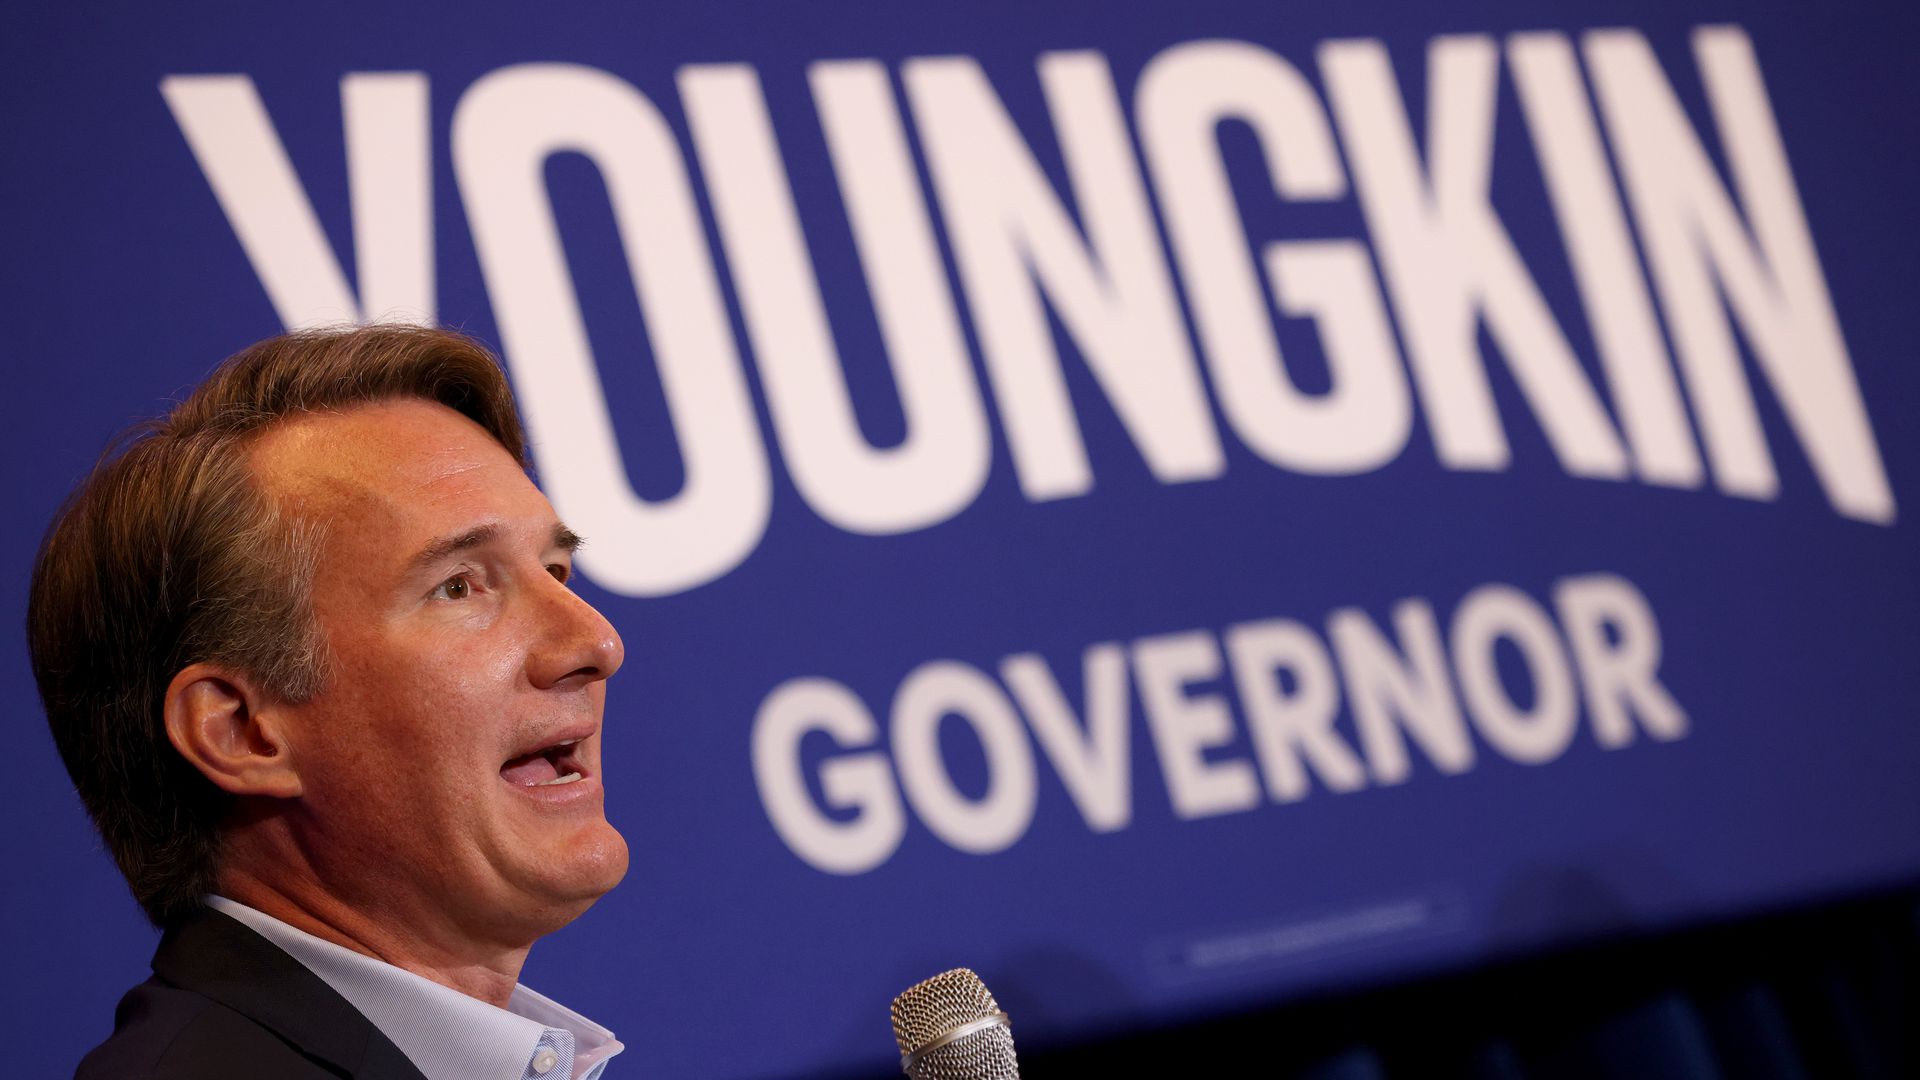 Republican Glenn Youngkin triumphed in his Virginia gubernatorial race over Democrat Terry McAuliffe on Nov. 2, 2021. Photo: Win McNamee/Getty Images.